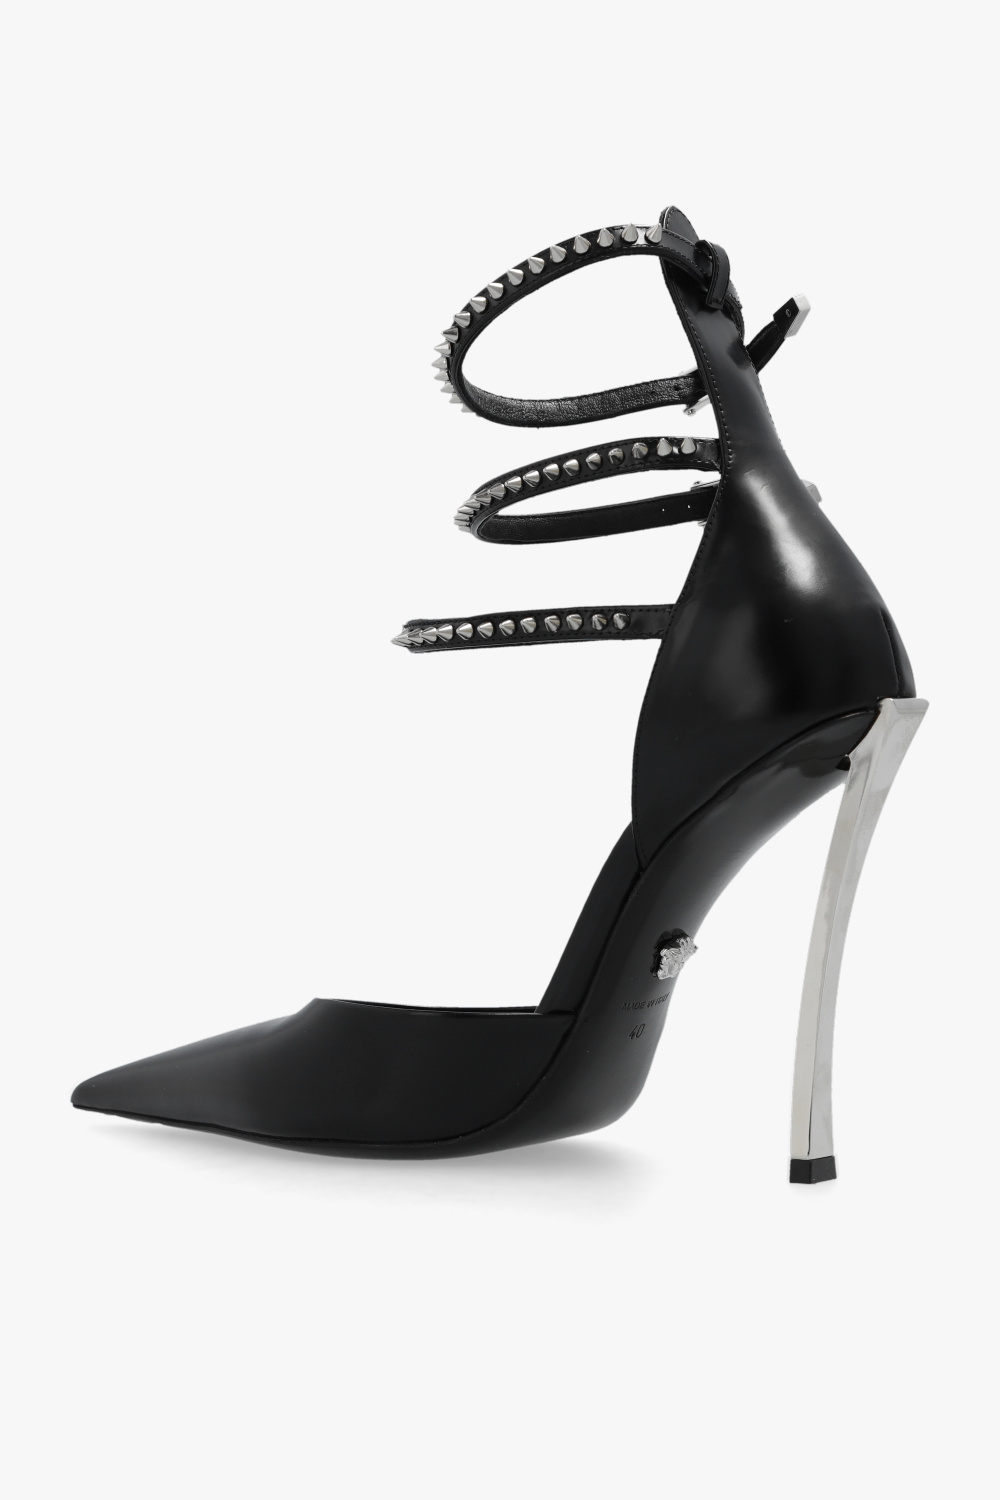 Versace ‘Spiked Pin-Point’ pumps